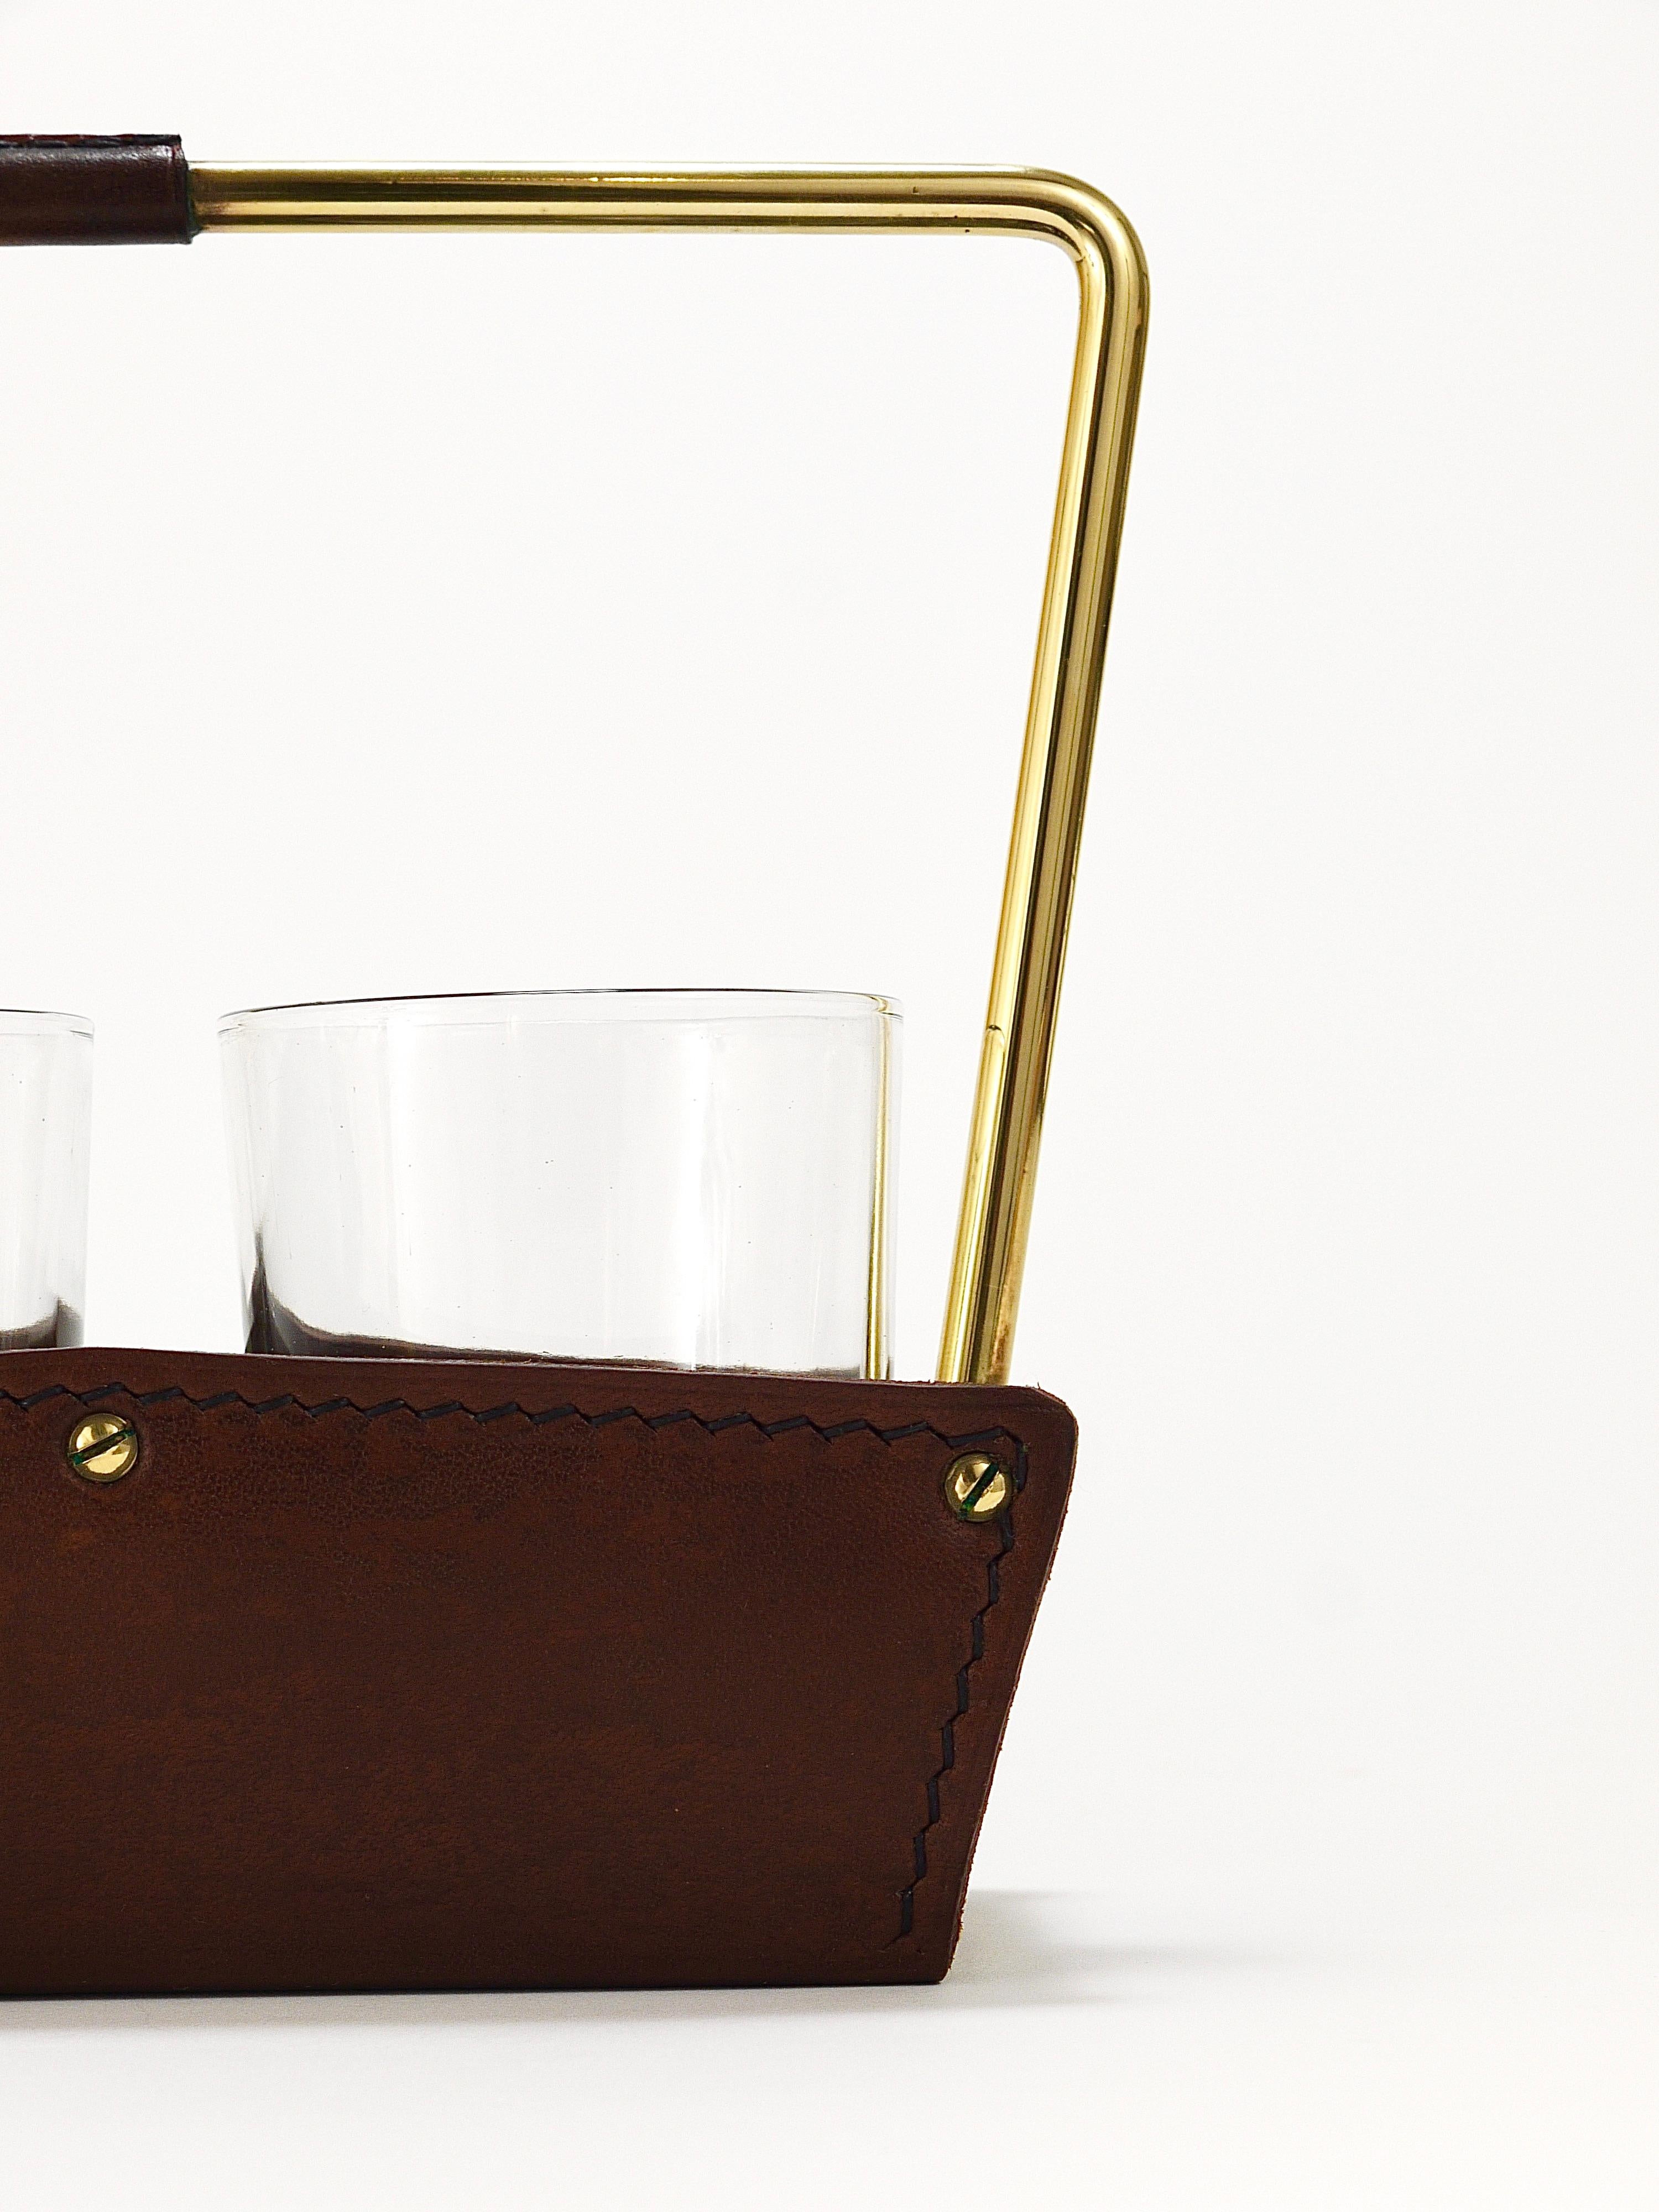 Carl Auböck II Drinking Glass Carrying Rack, Leather & Brass, Austria 1950s For Sale 2